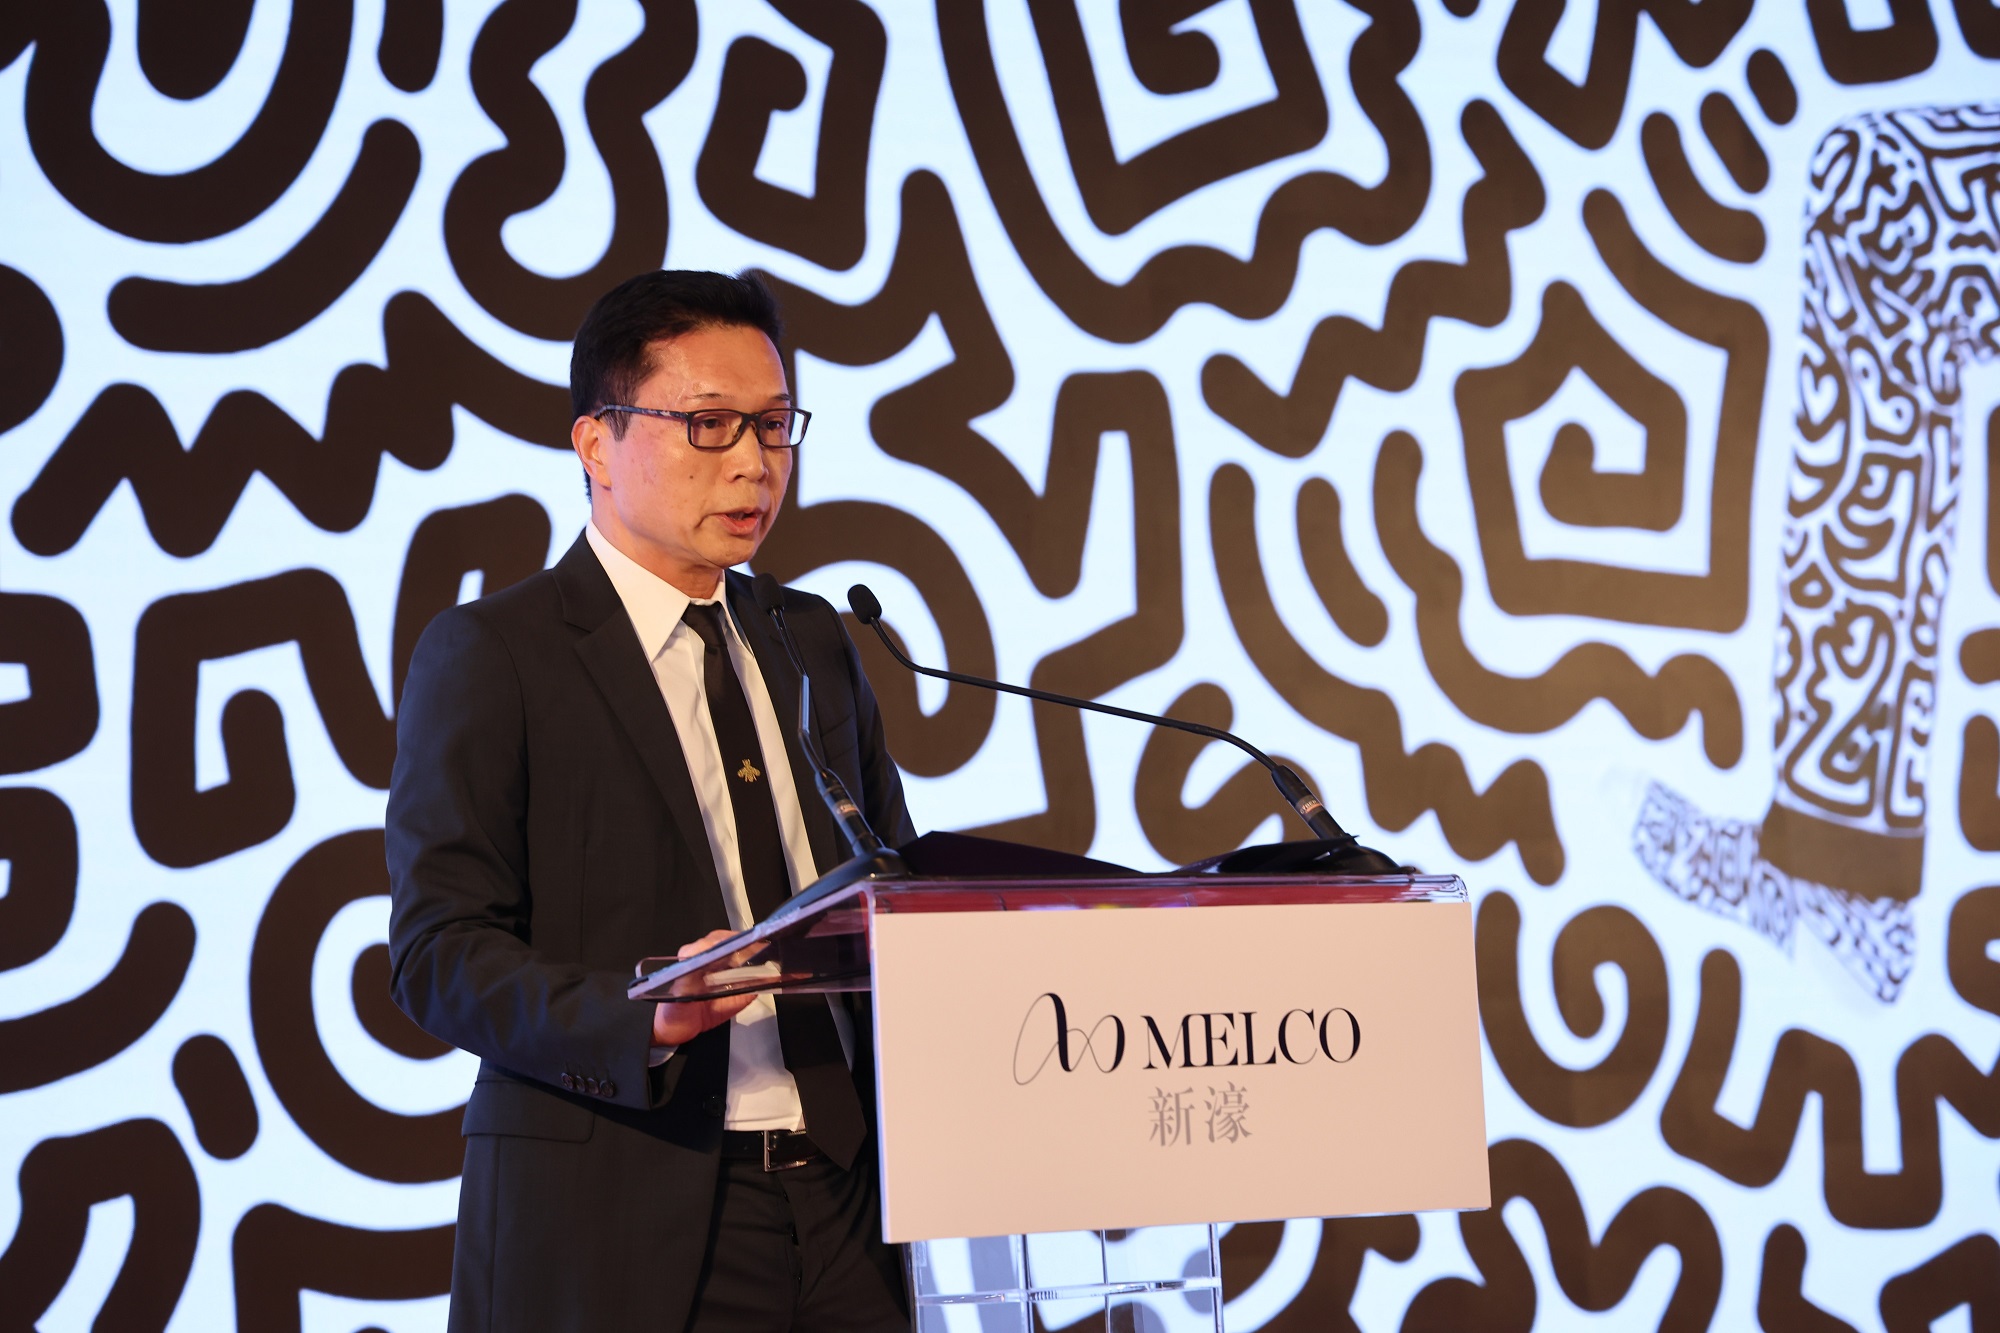 Mr. Clarence Chung, Board Director of Melco Resorts & Entertainment delivers a speech in the Opening Ceremony of “Mr Doodle First Exhibition in Macao” at City of Dreams.